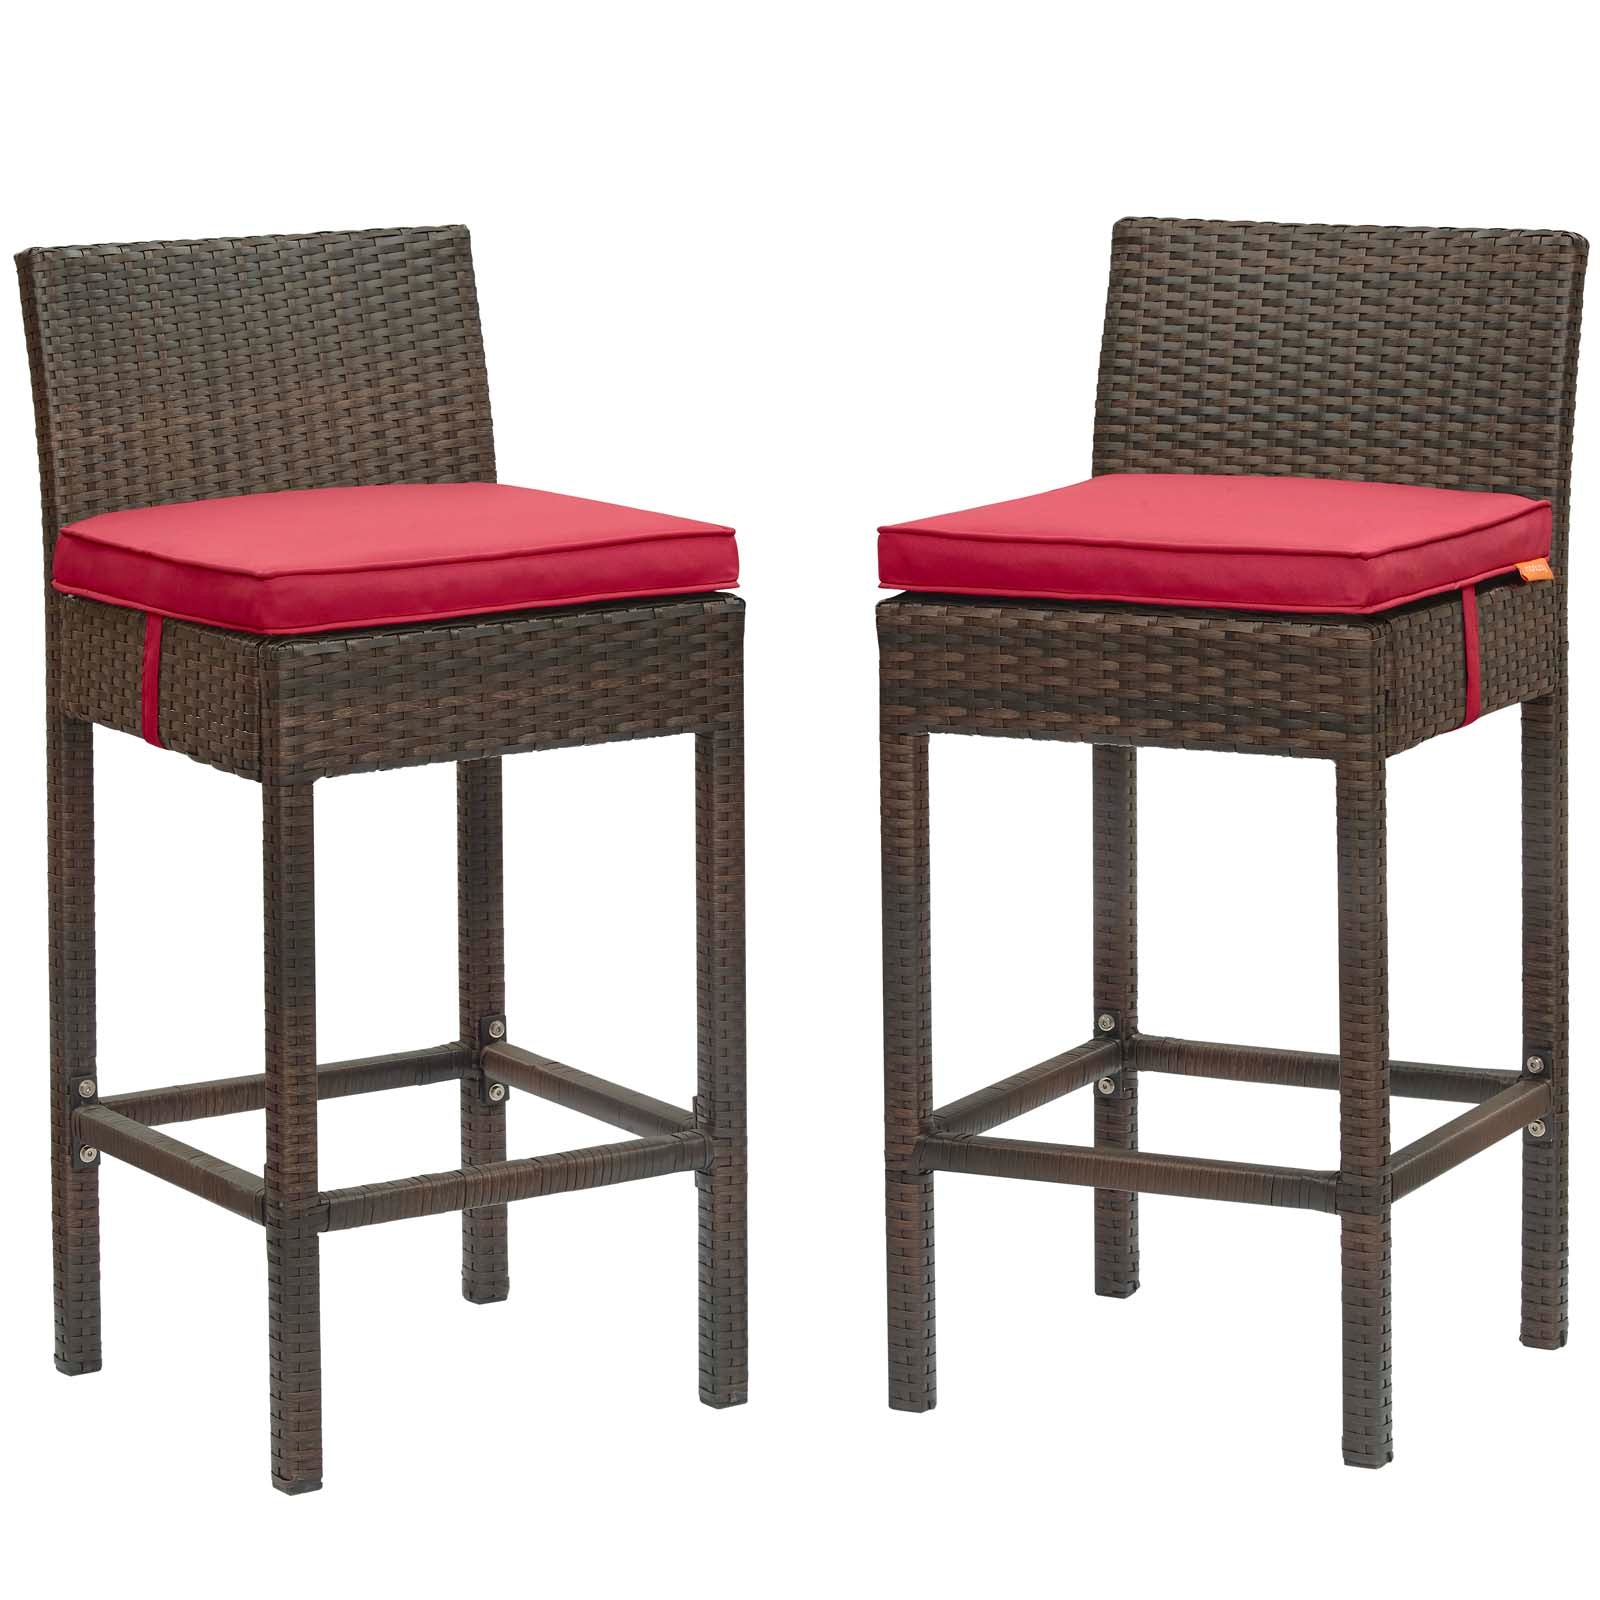 Modway Outdoor Barstools - Conduit Bar Stool Outdoor Patio Wicker Rattan Set of 2 Brown Red